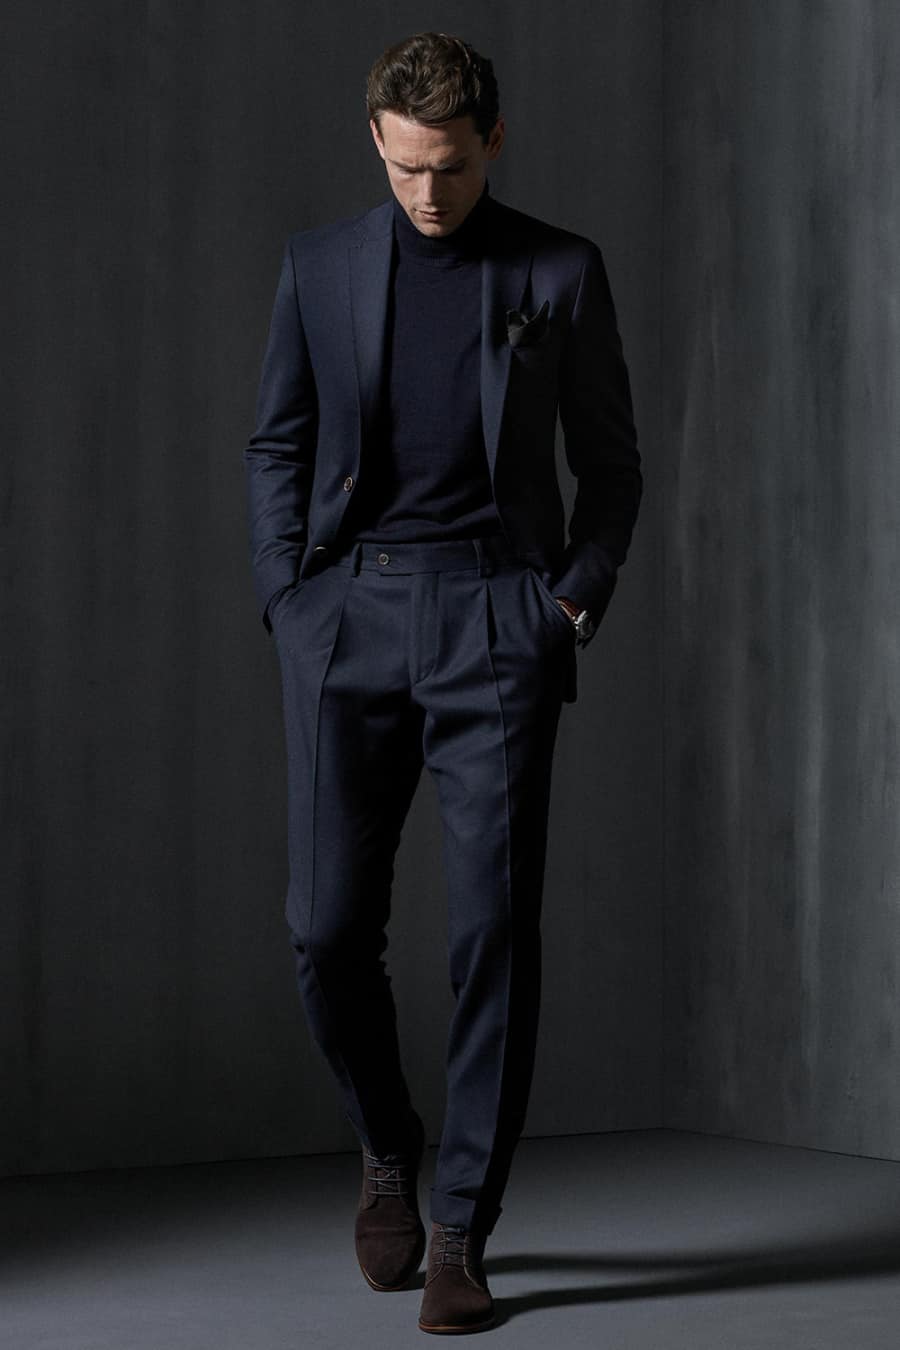 Men's navy lounge suit, turtleneck and suede boots outfit